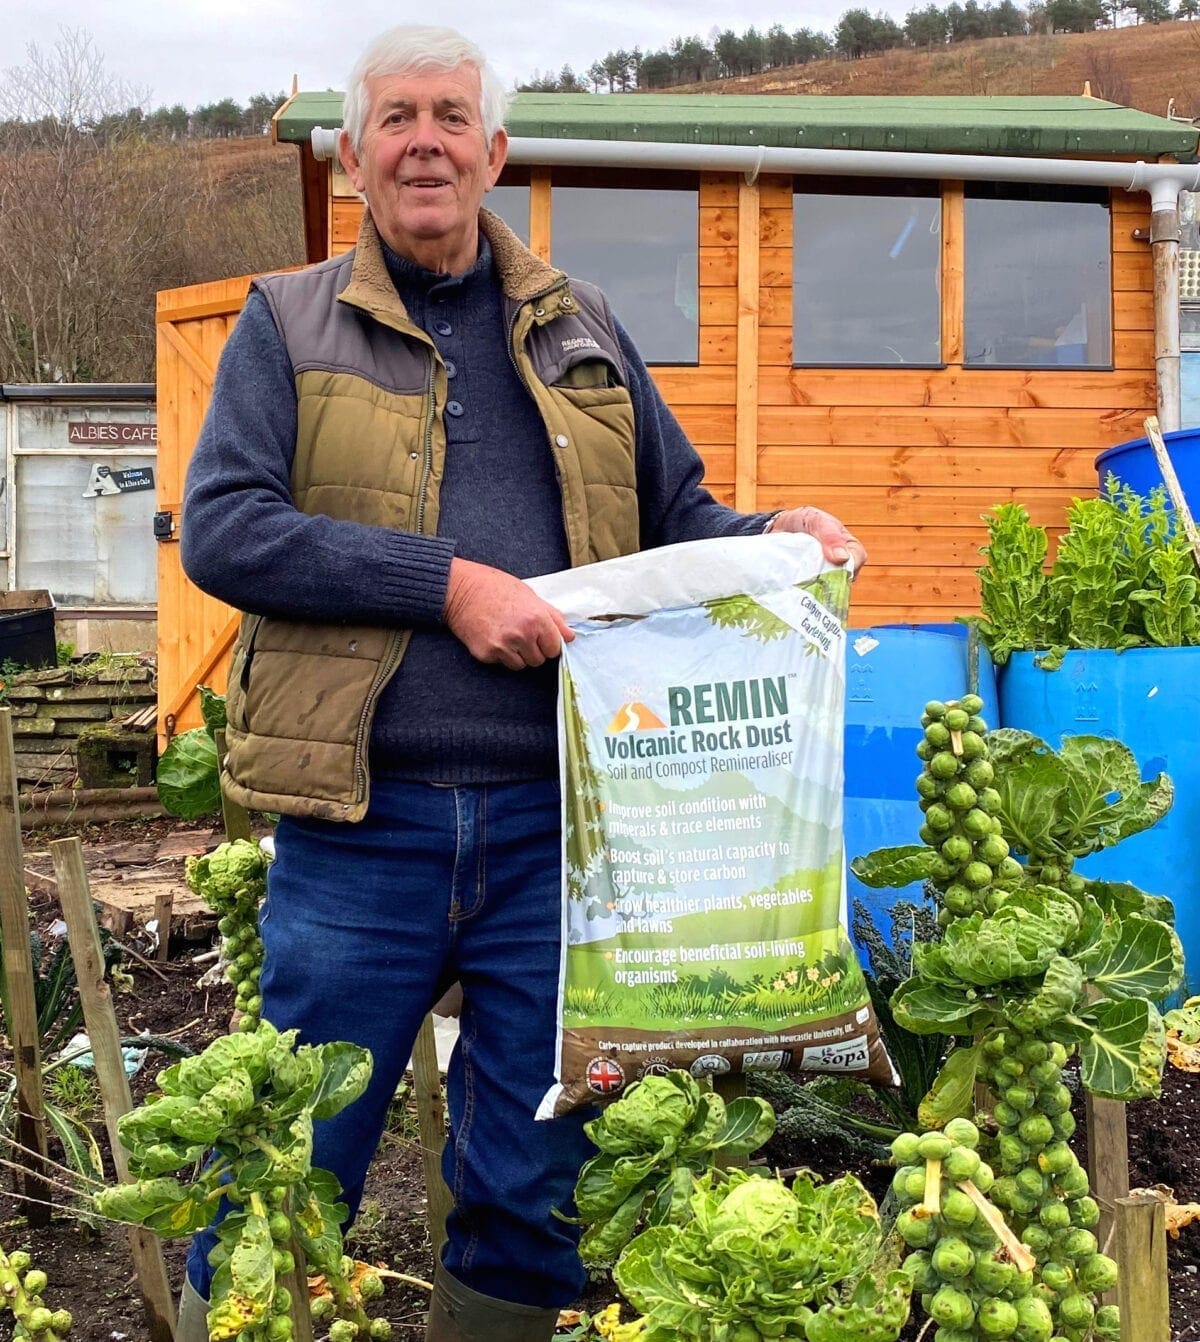 Terry Walton is a convert to the benefits of using rock dust to grow healthy veg